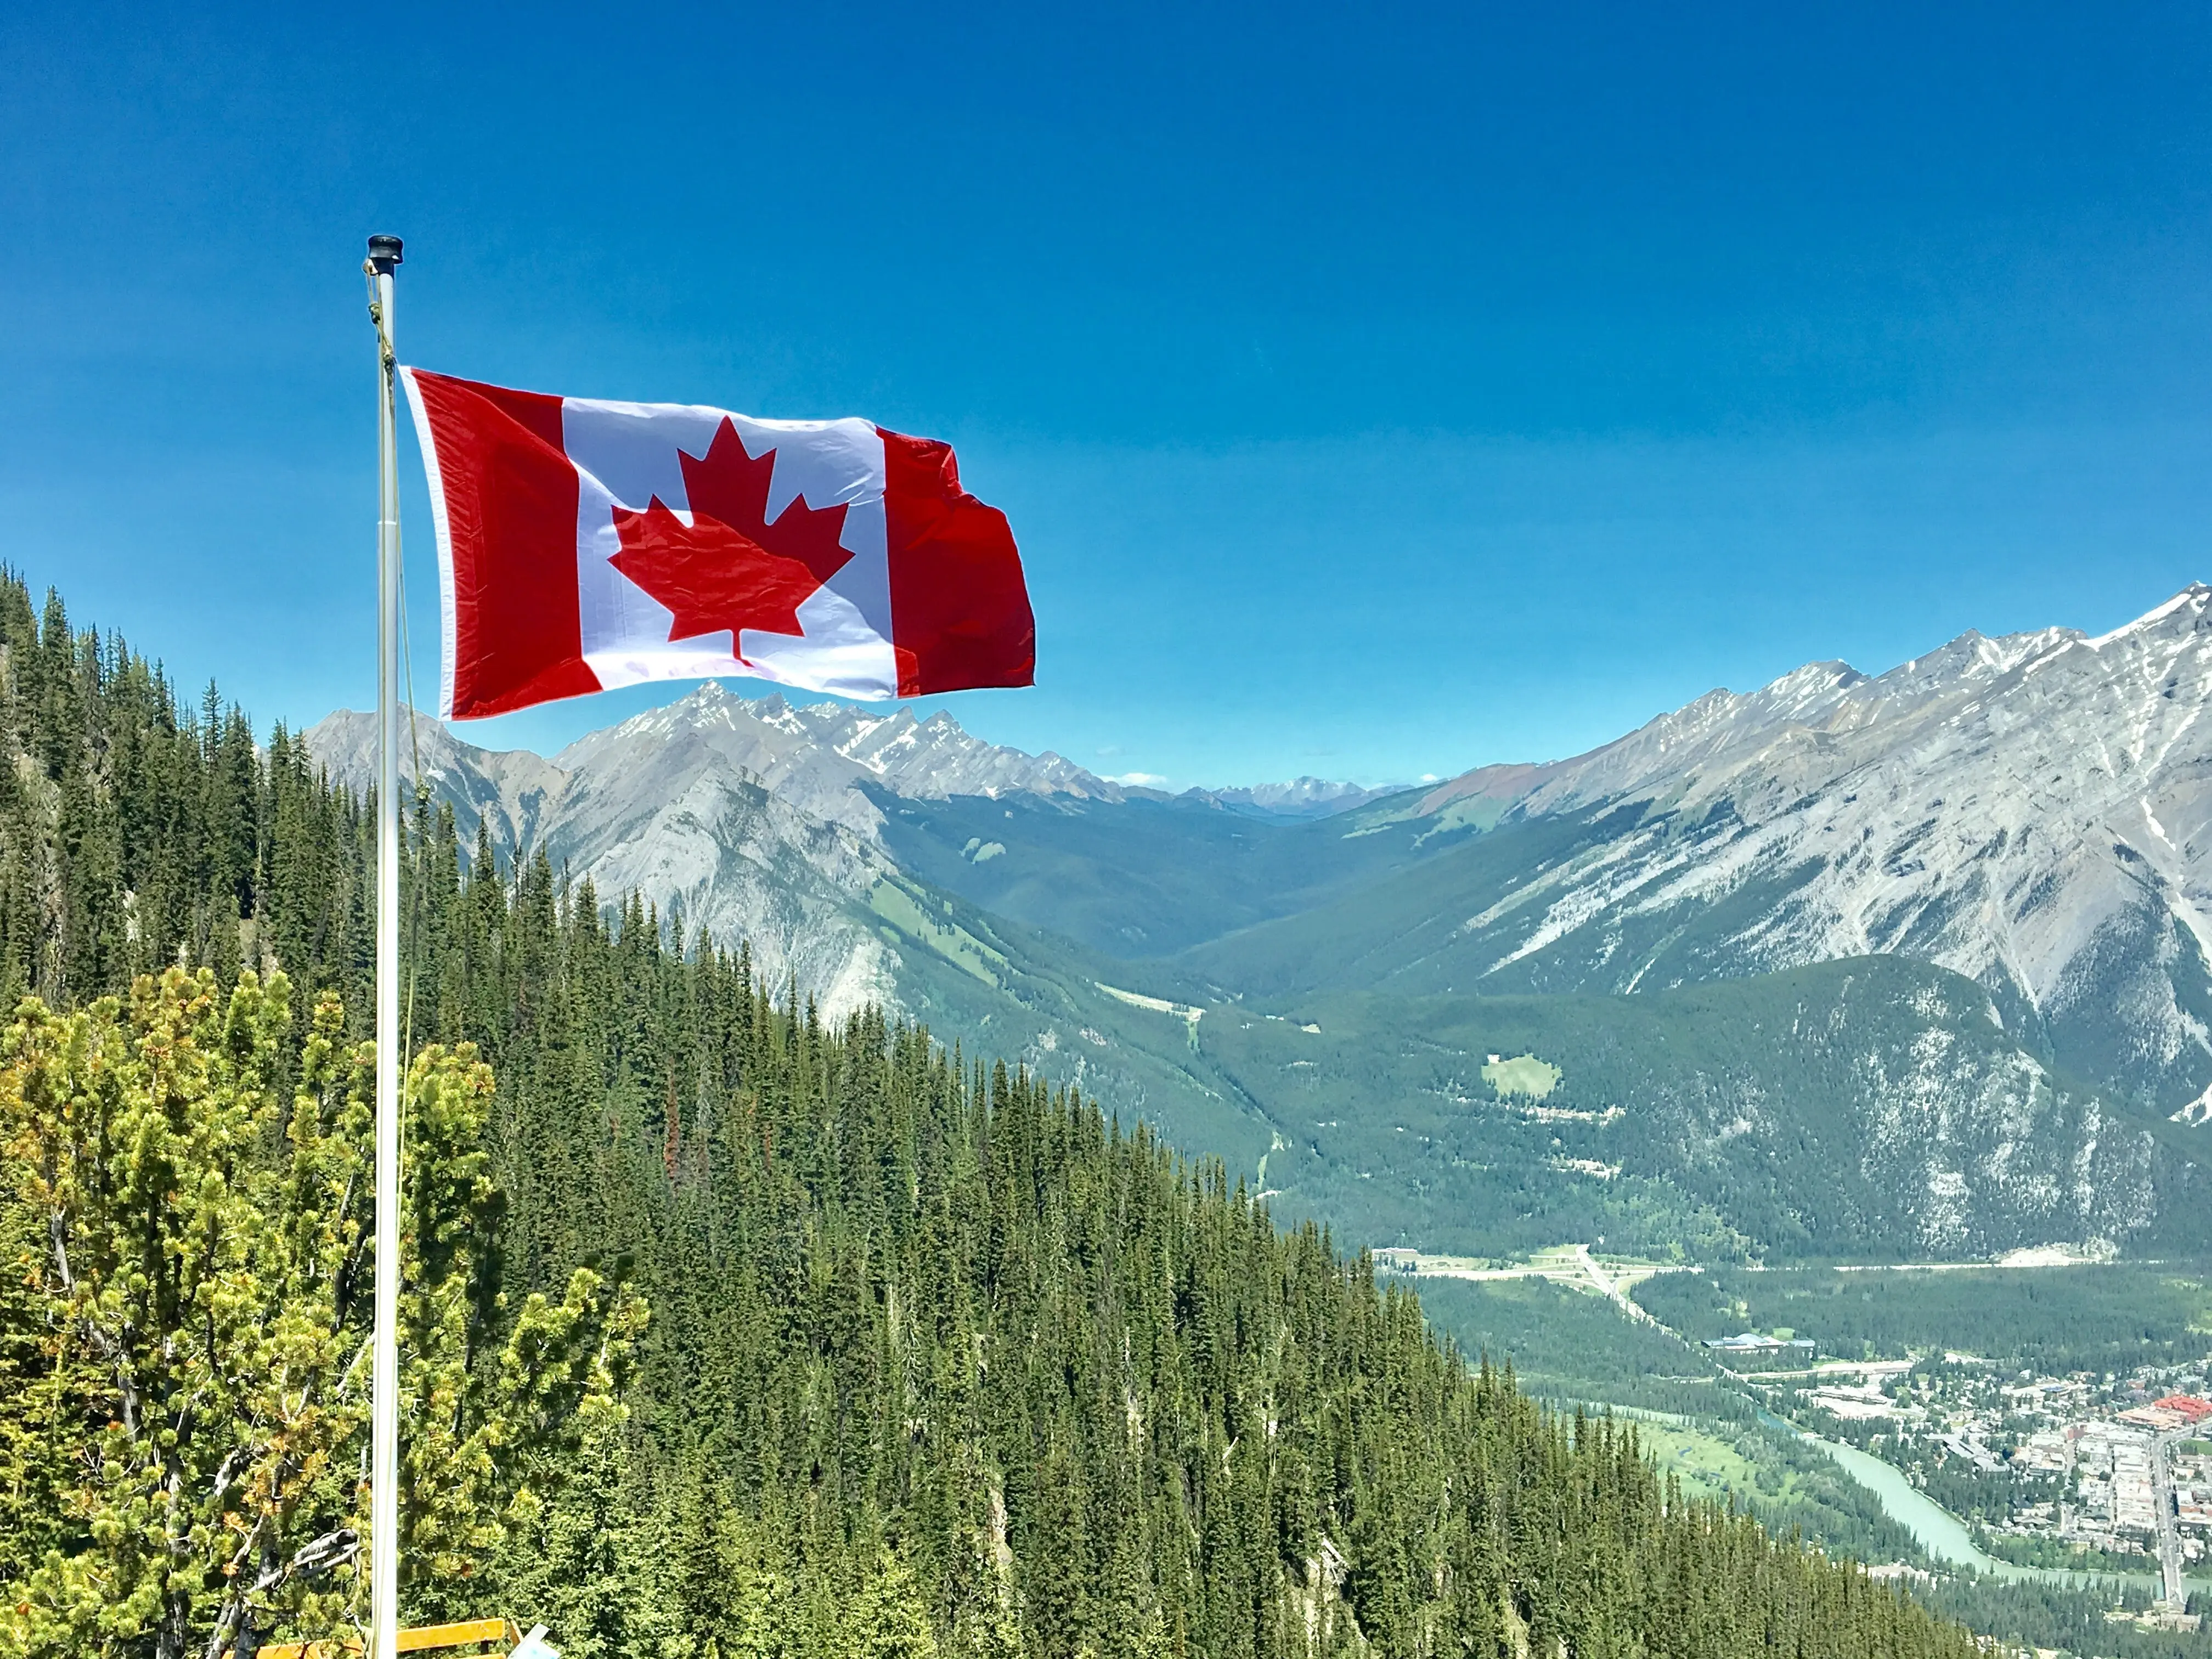 Canadian flag at top of a flag pole, overlooking a mountain range